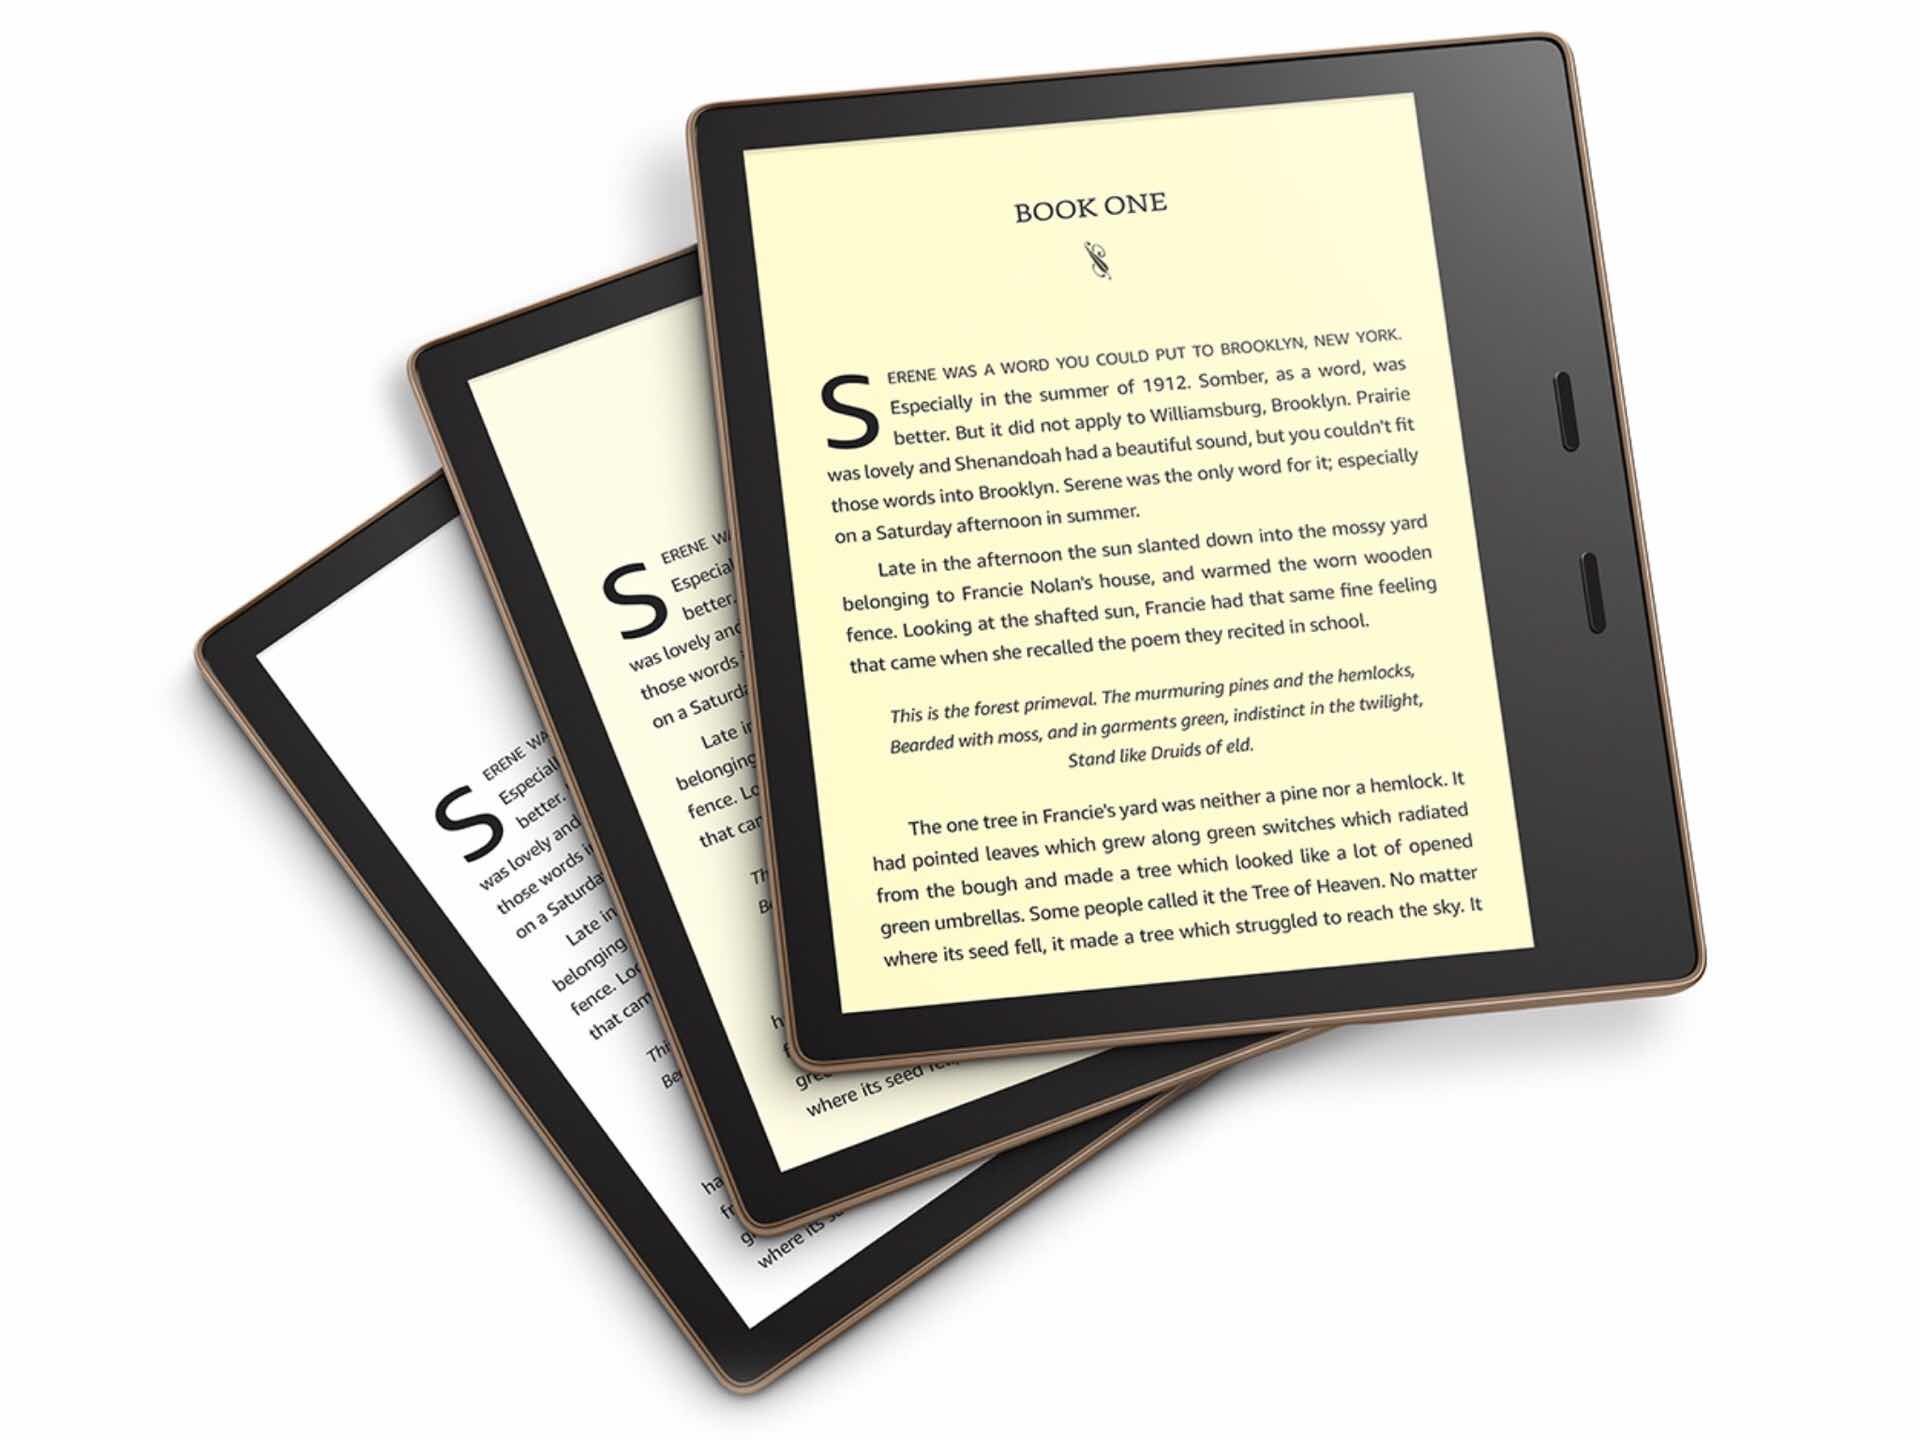 Amazon's 2019 Kindle Oasis ebook reader. (from $250)